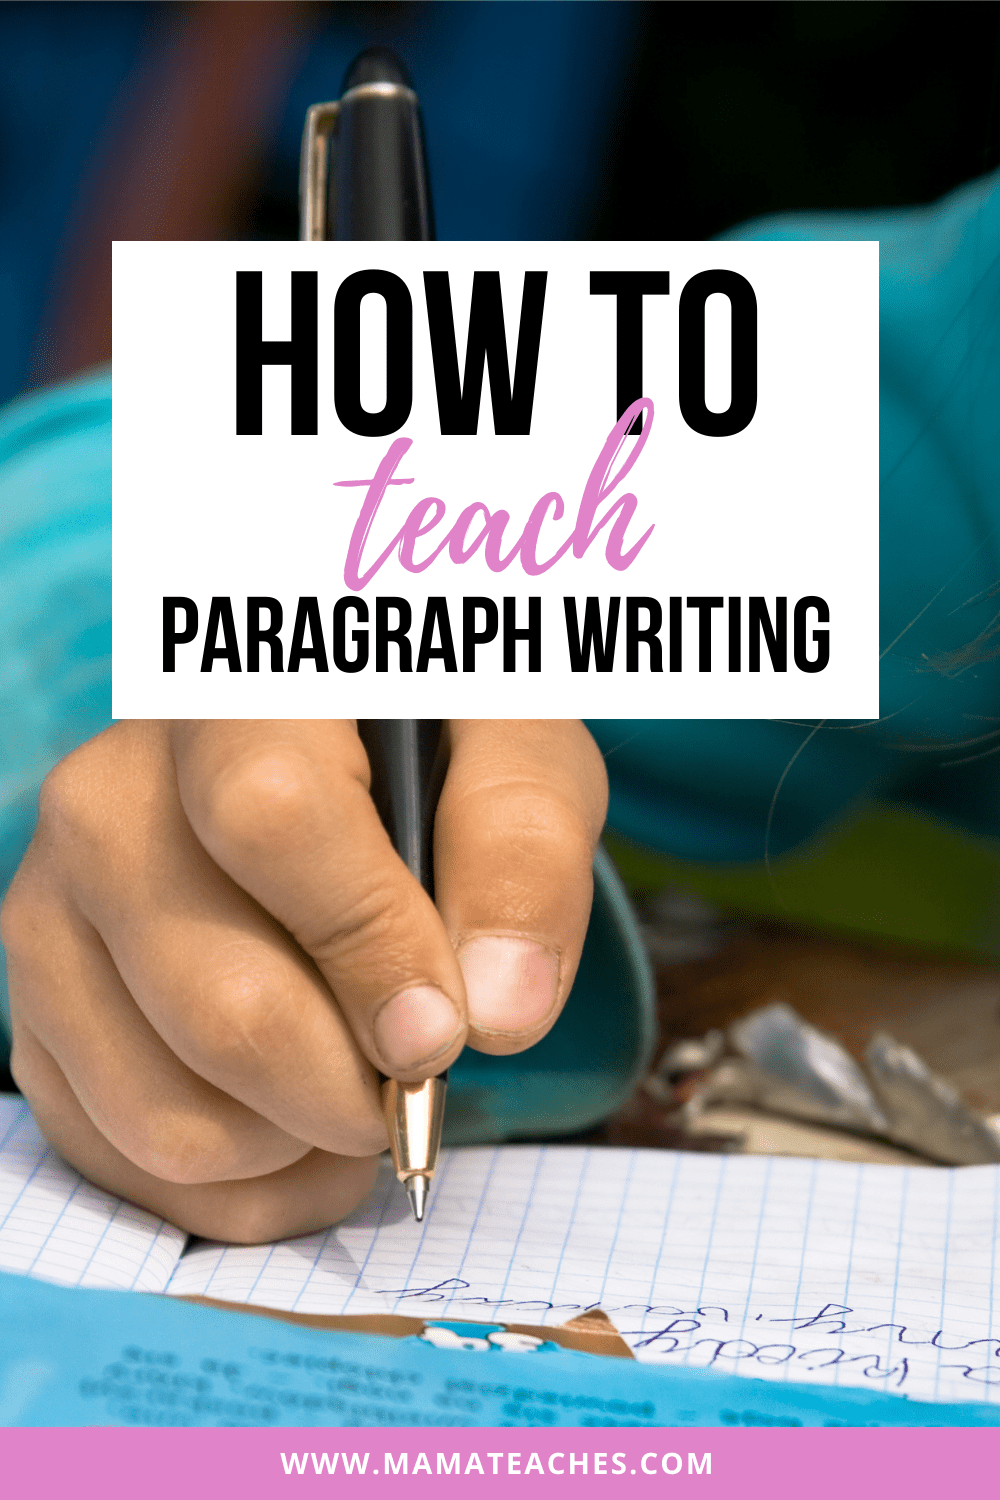 How to Teach Paragraph Writing